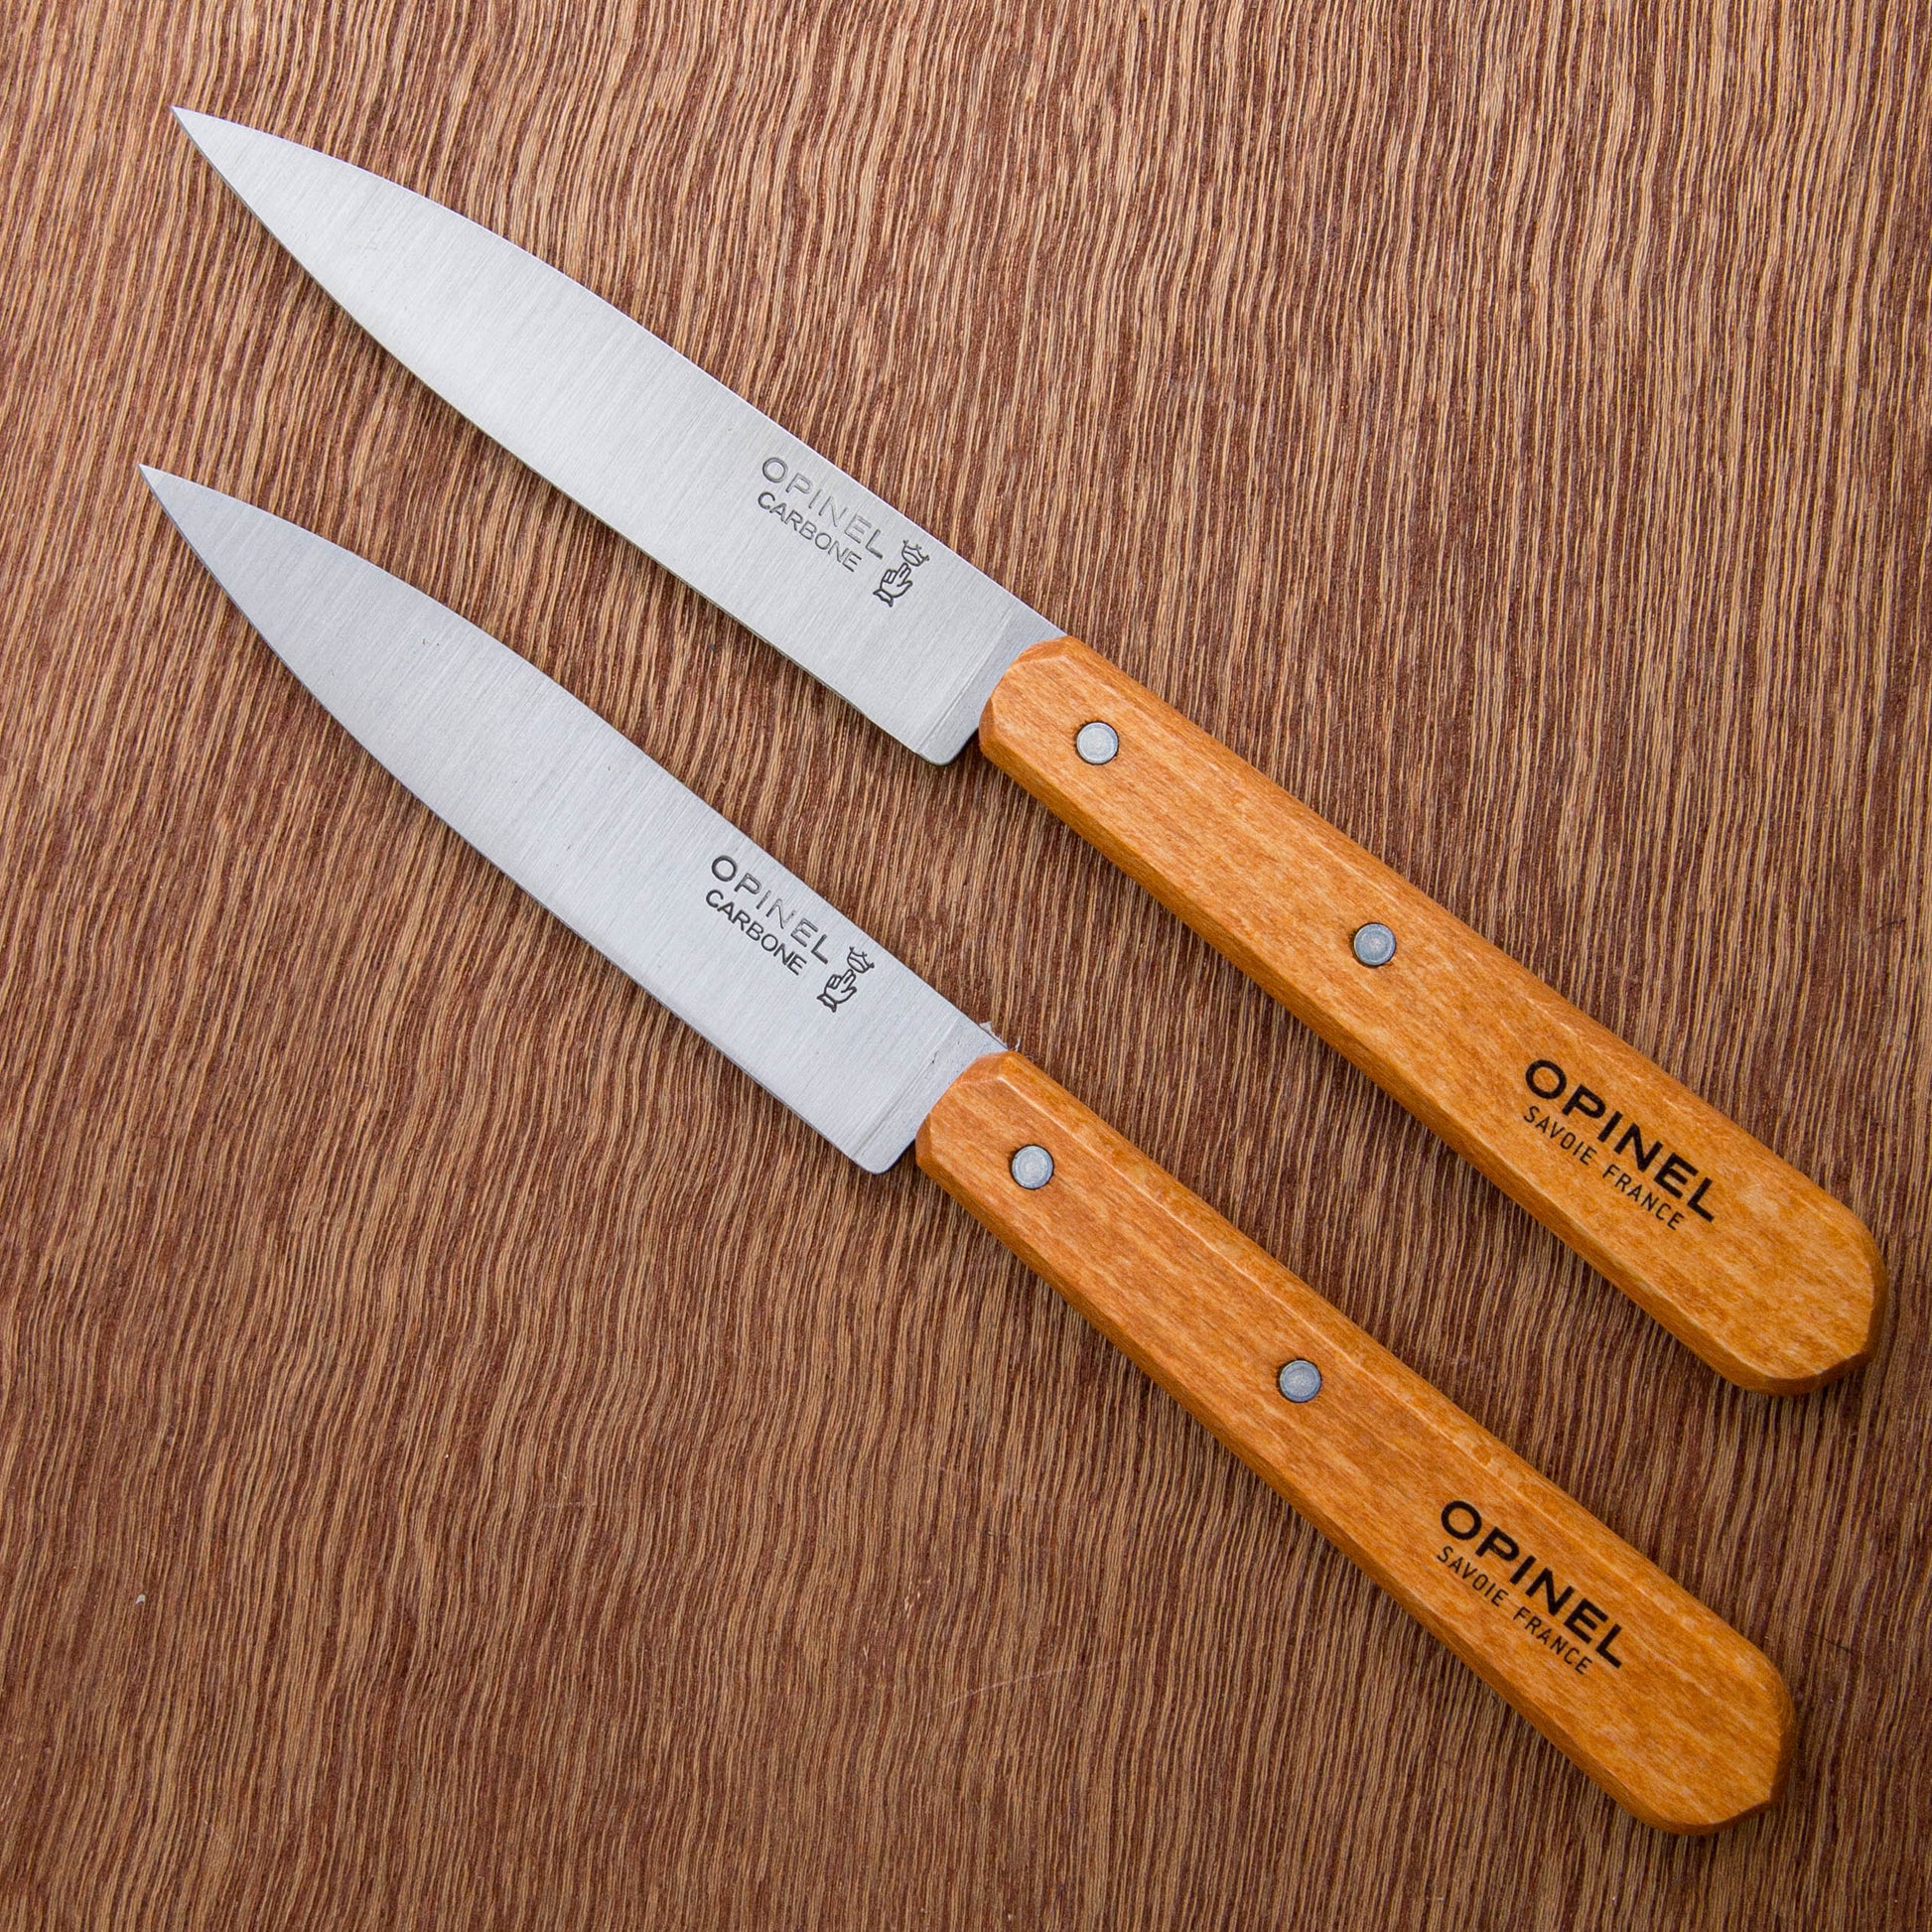 Opinel No. 102 Carbon Steel Paring Knife 2pc w/ Beech Wood Handle